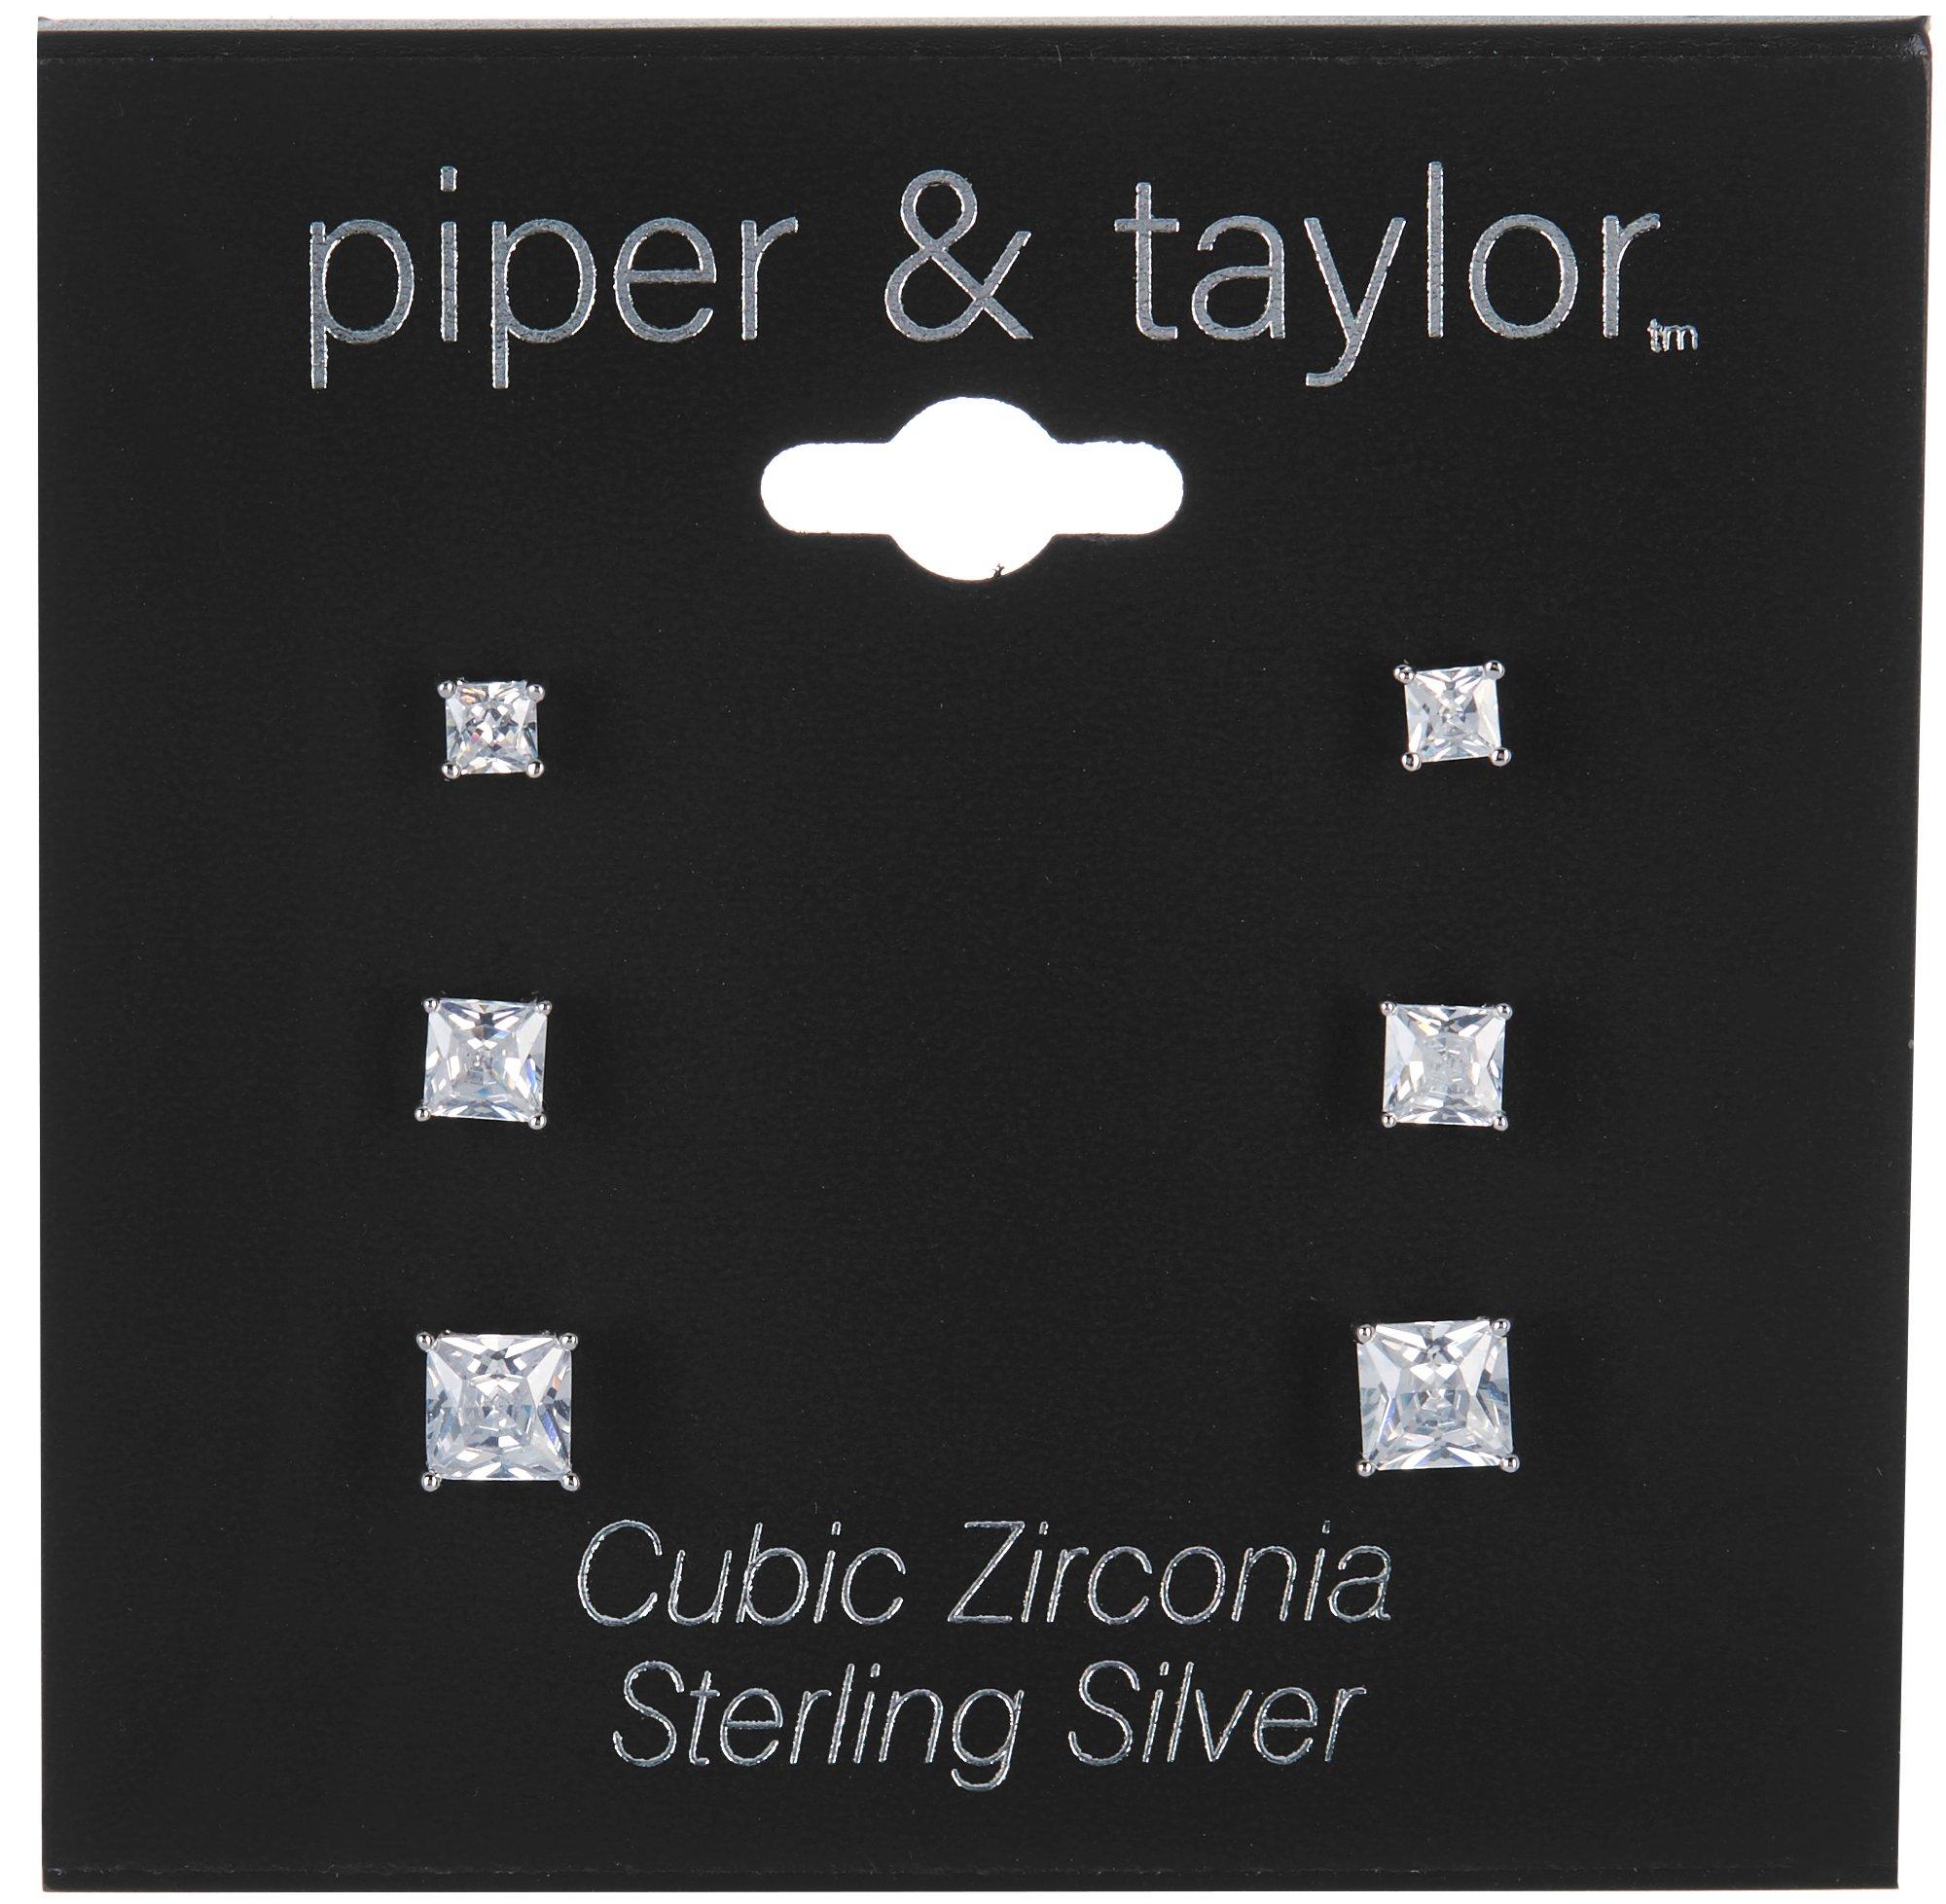 Piper & Taylor 3-Pc. Cubic Zirconia Square Earrings